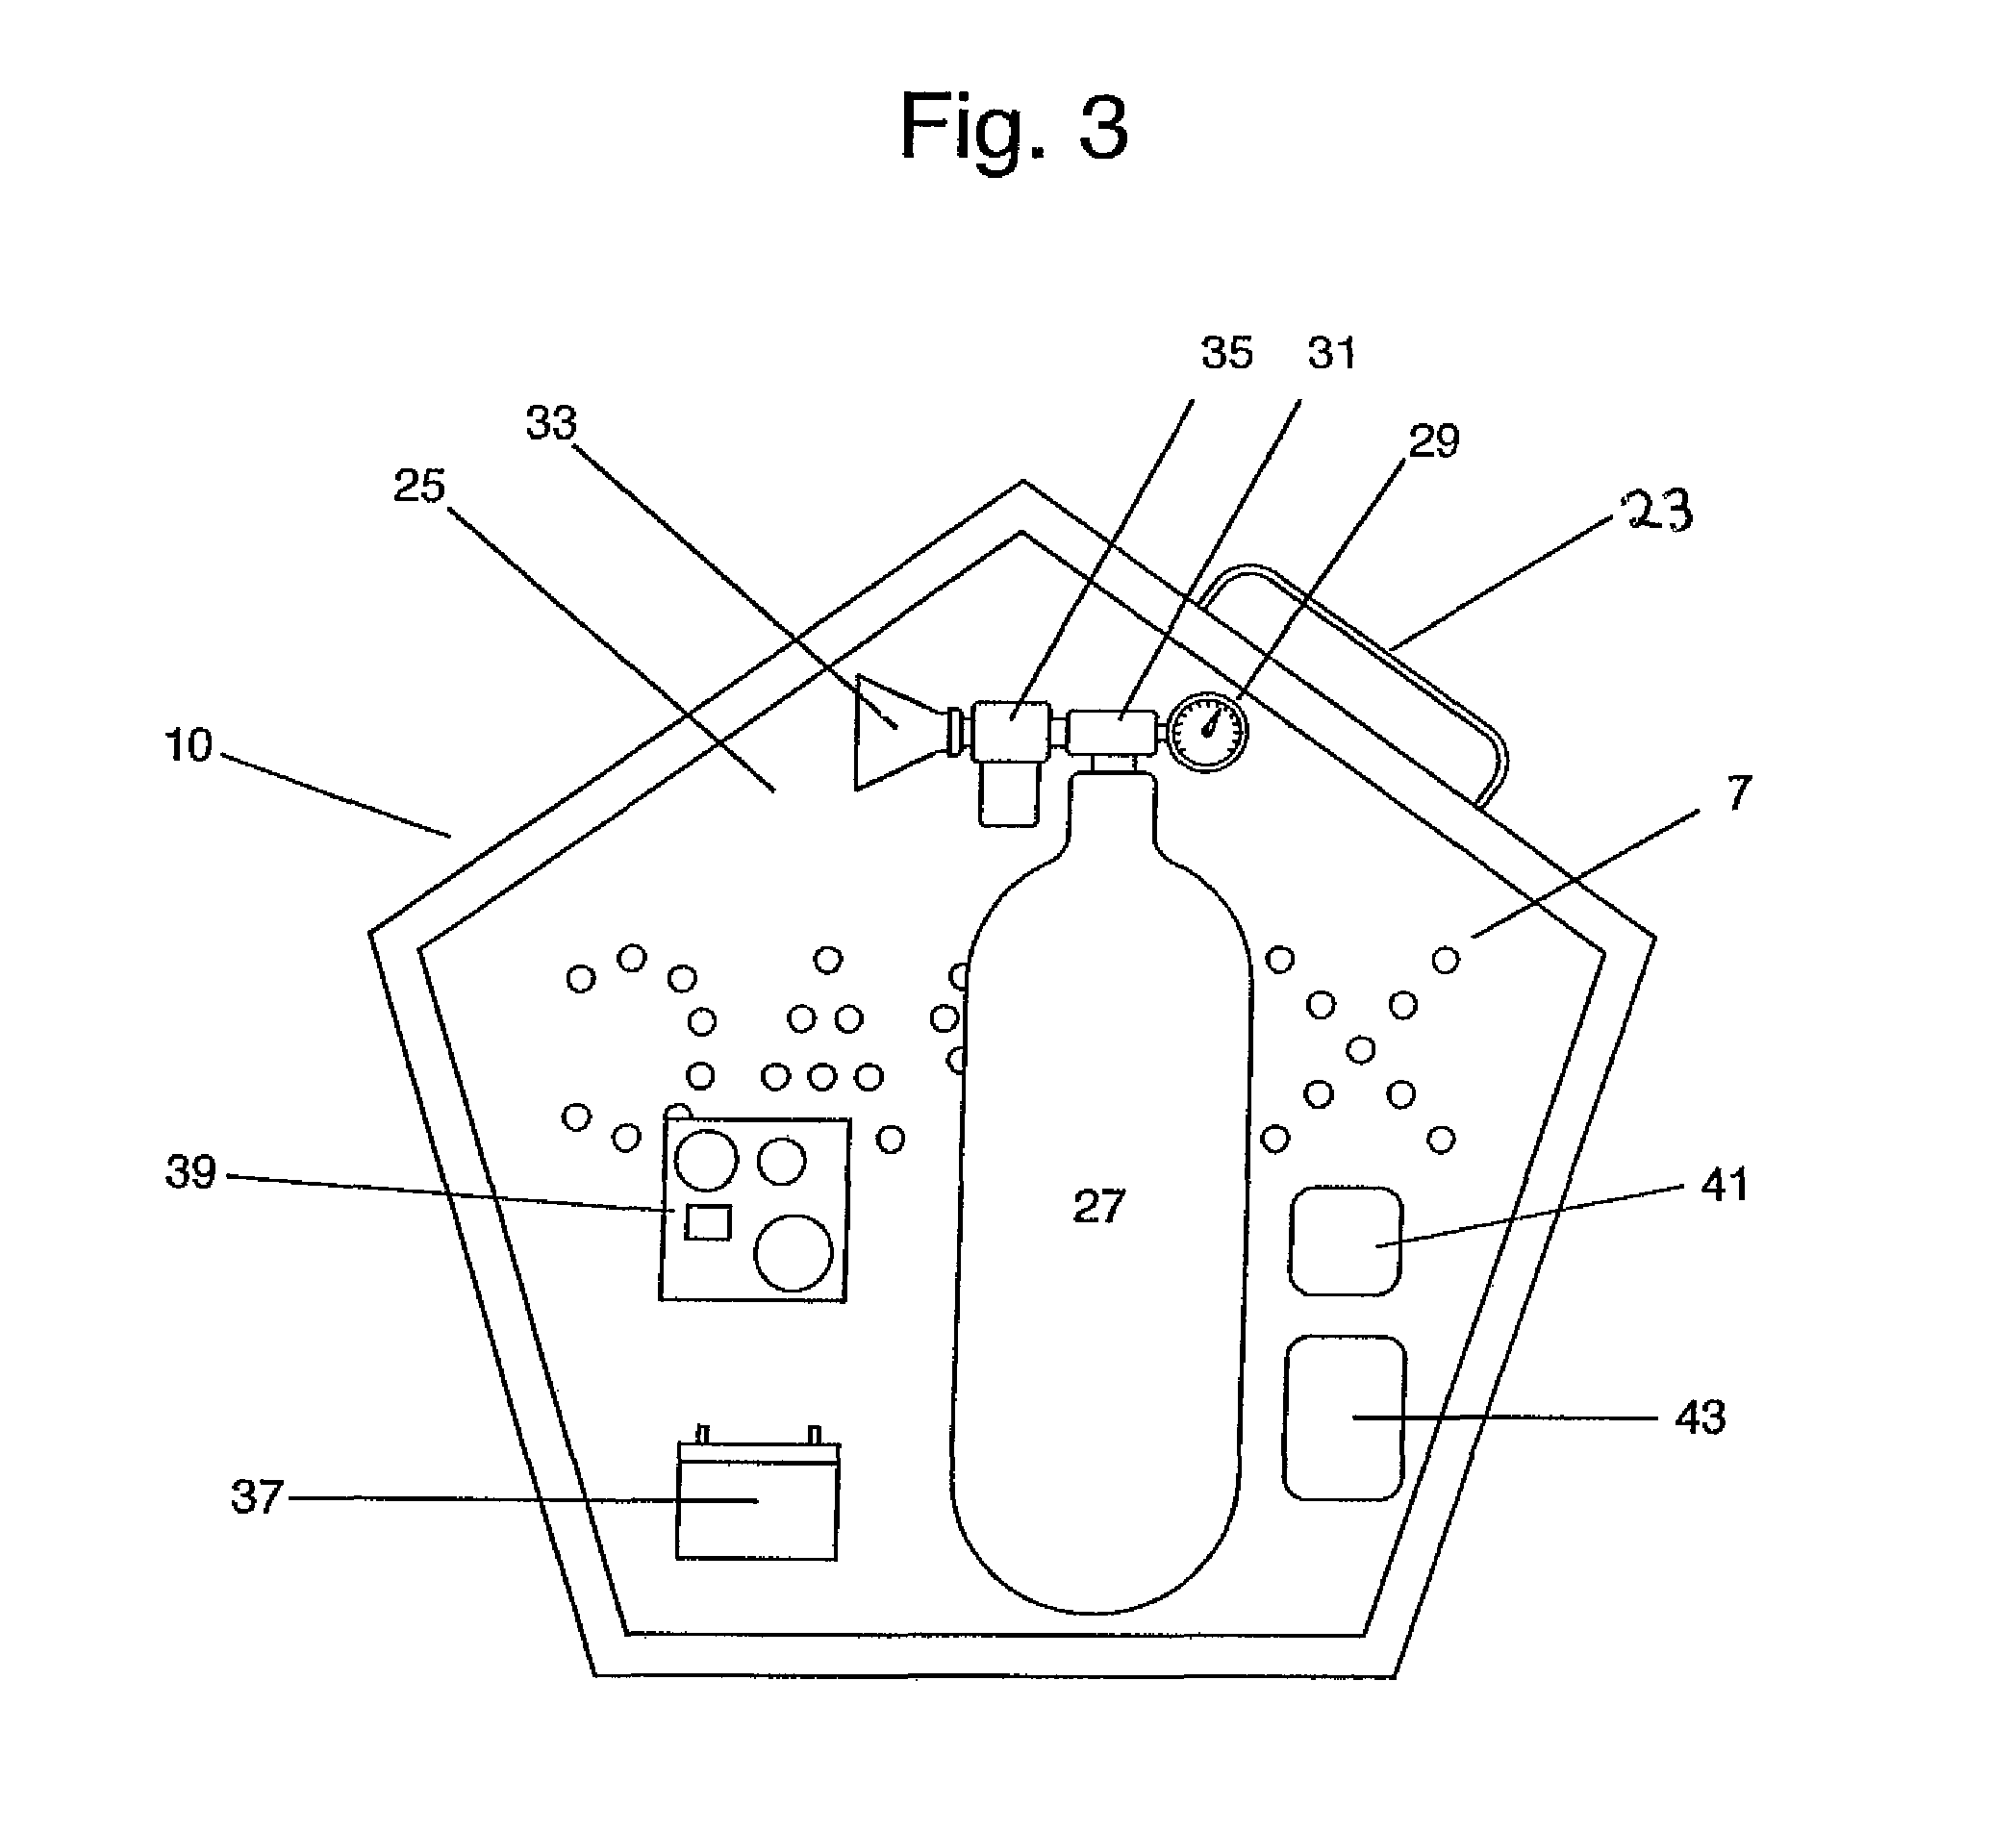 Fire suppression system for aircraft storage containers